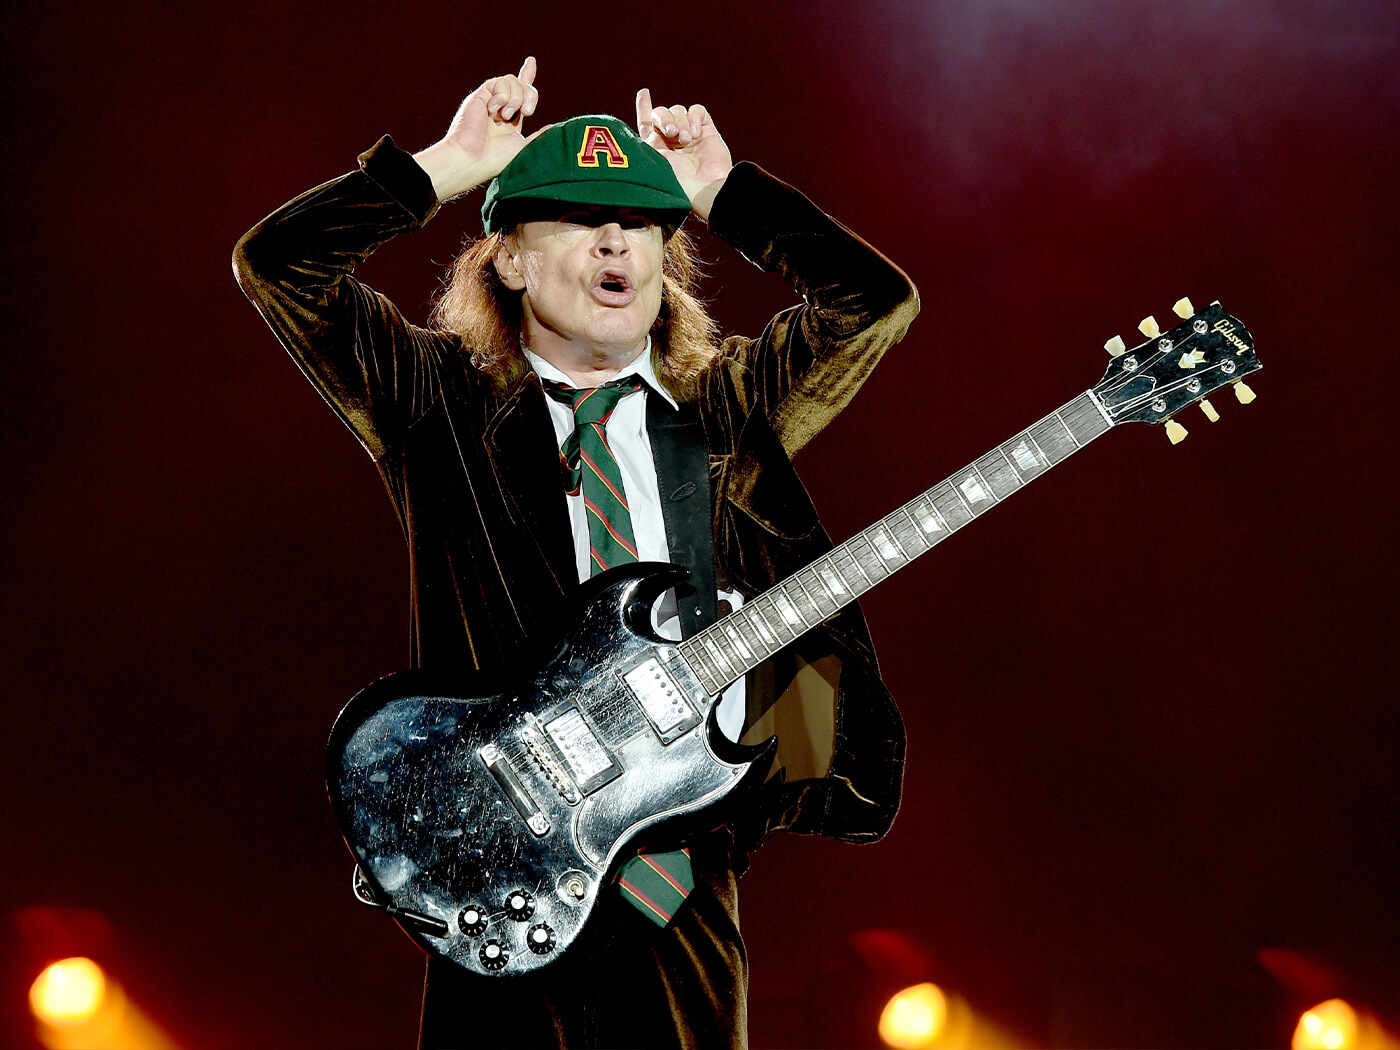 concierto cuscús grava Five myths about Angus Young's AC/DC guitar gear that people still believe  | Guitar.com | All Things Guitar